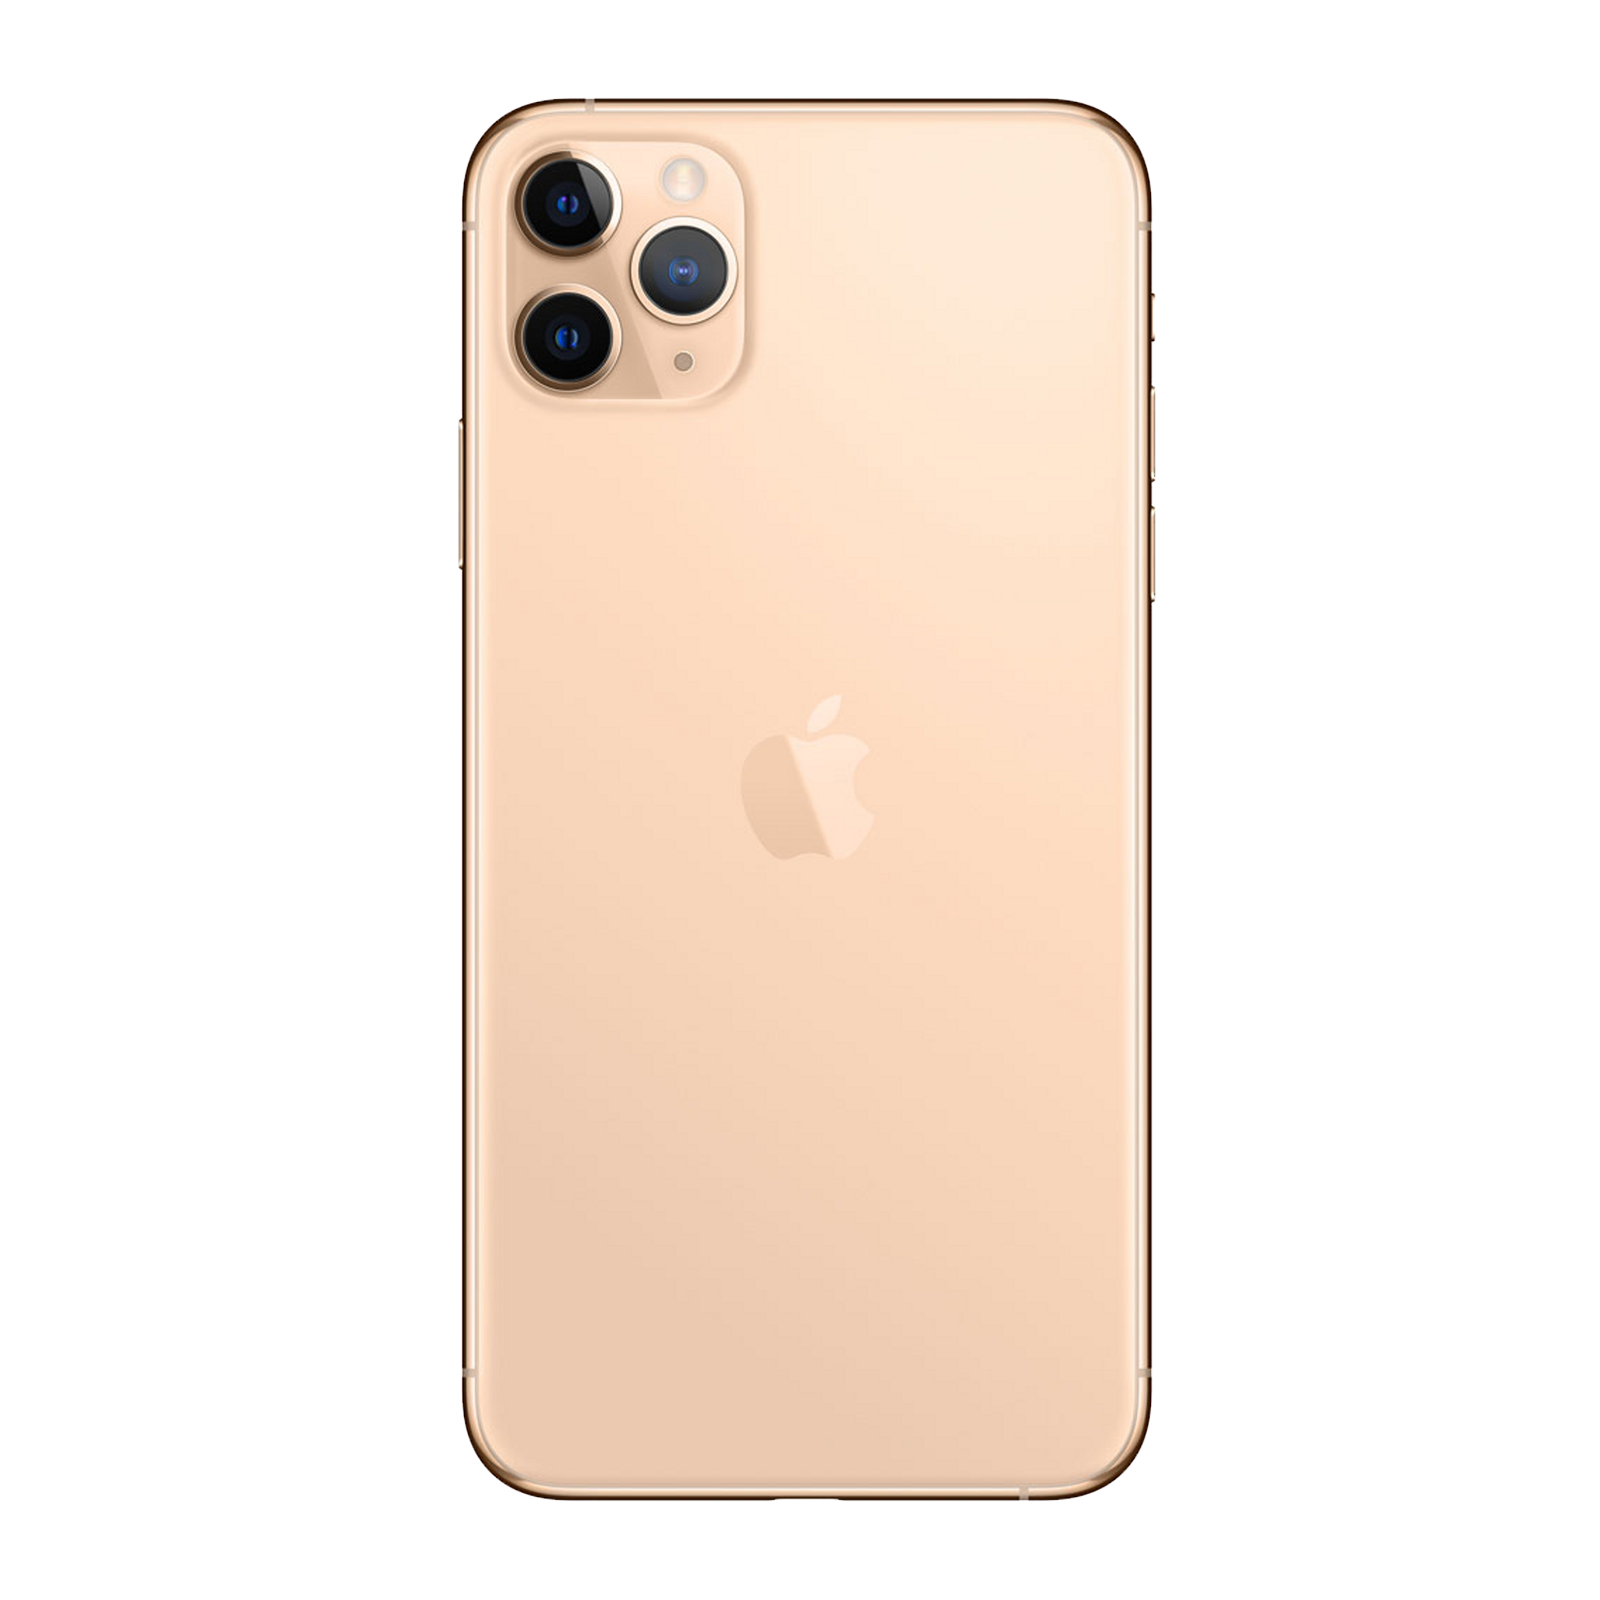 Apple iPhone 11 Pro 64GB Gold Very Good - T-Mobile